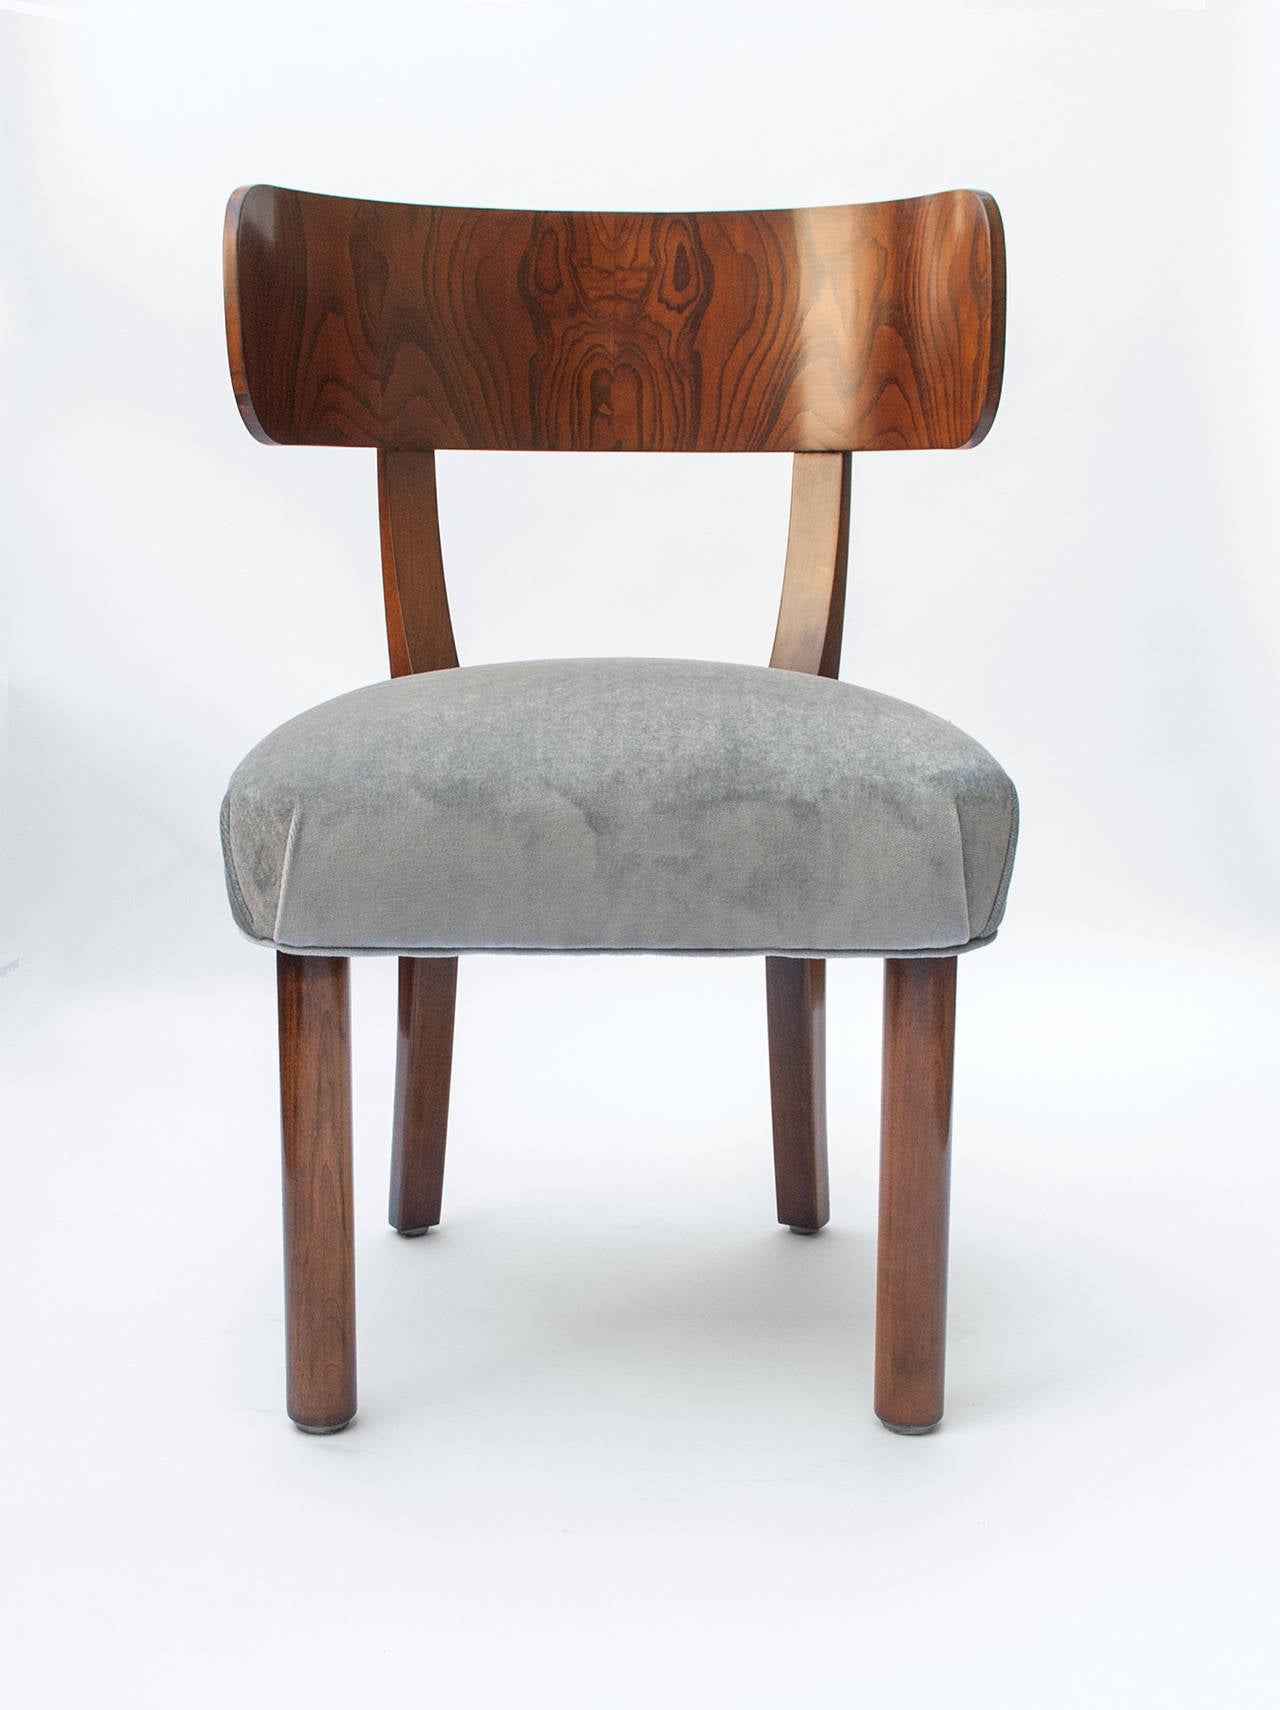 Four Swedish Art Deco Dining Chairs by Axel Einar Hjorth for NK Stockholm 1